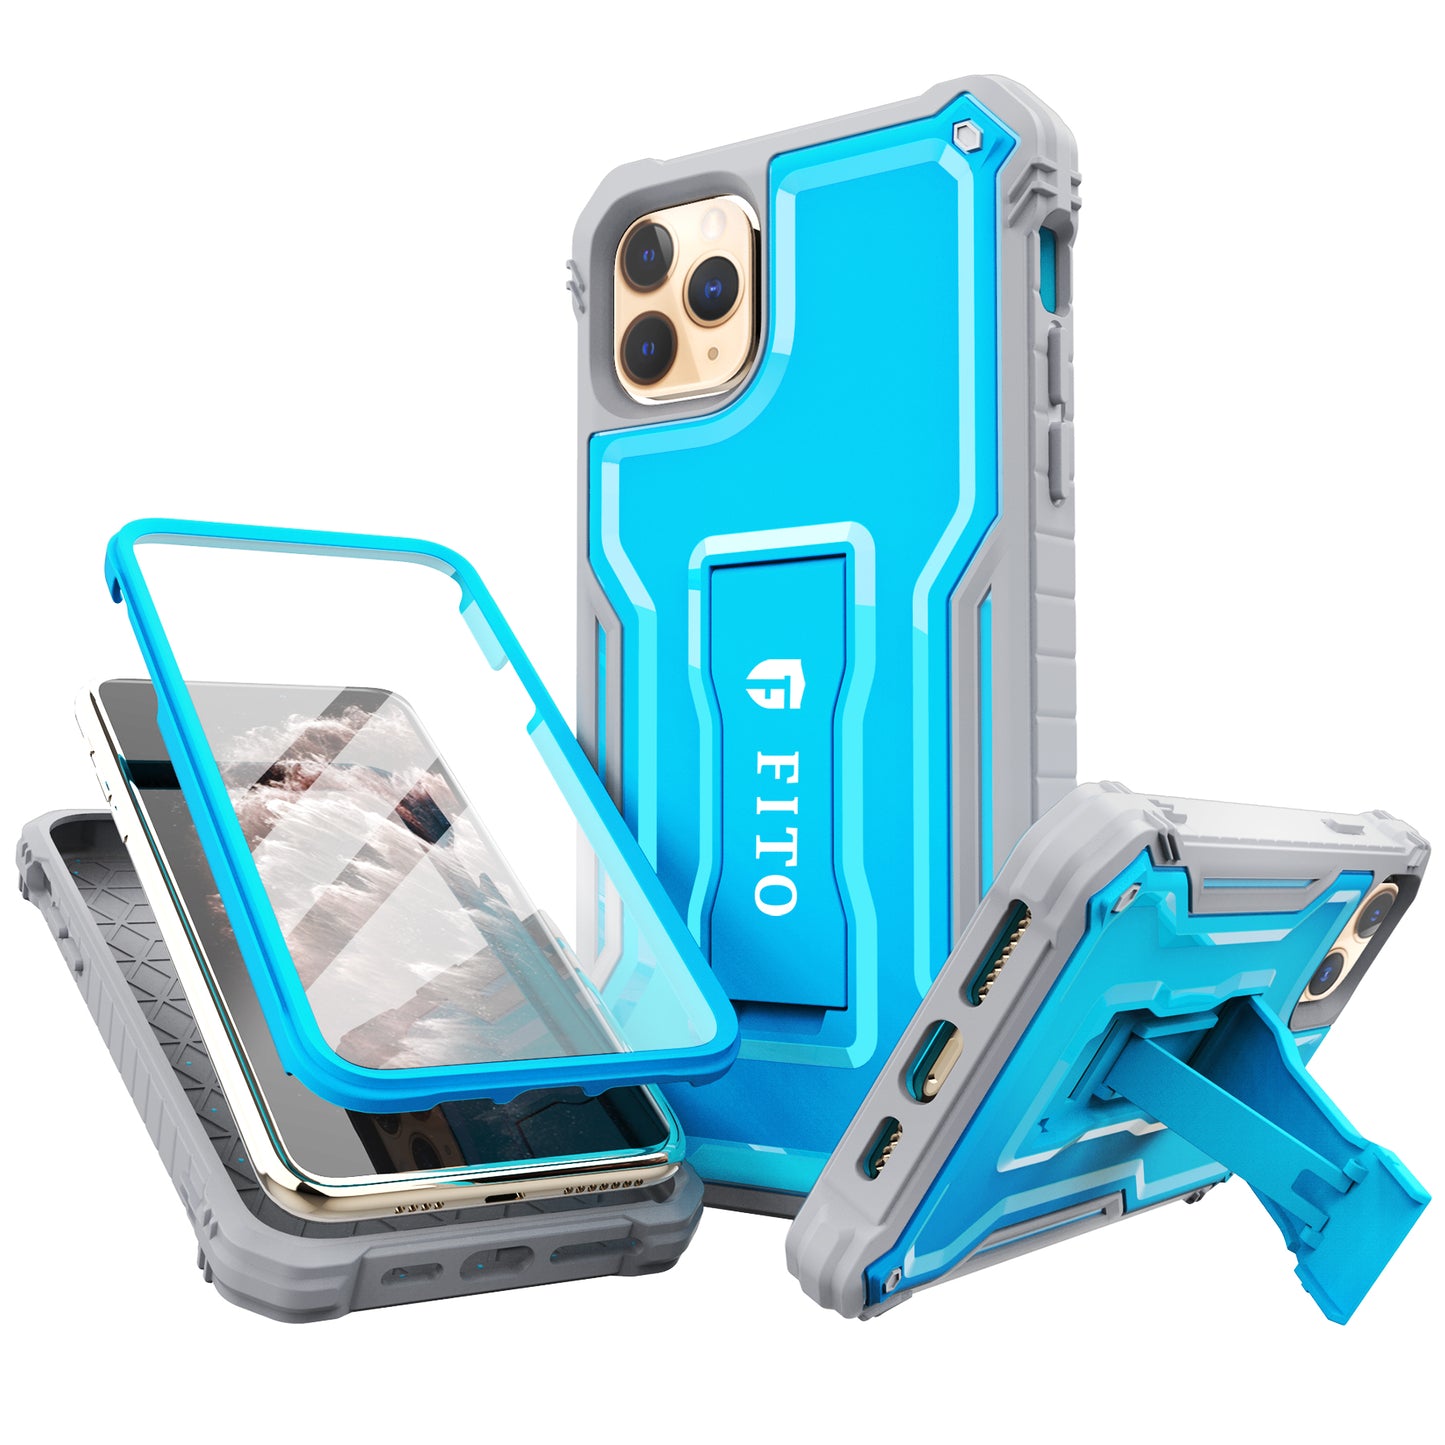 FITO Compatible with iPhone 11 Pro Max Case, Dual Layer Shockproof Heavy Duty Case with Screen Protector for iPhone 11 Pro Max and iPhone Xs Max 6.5 inch Phone, Built-in Kickstand